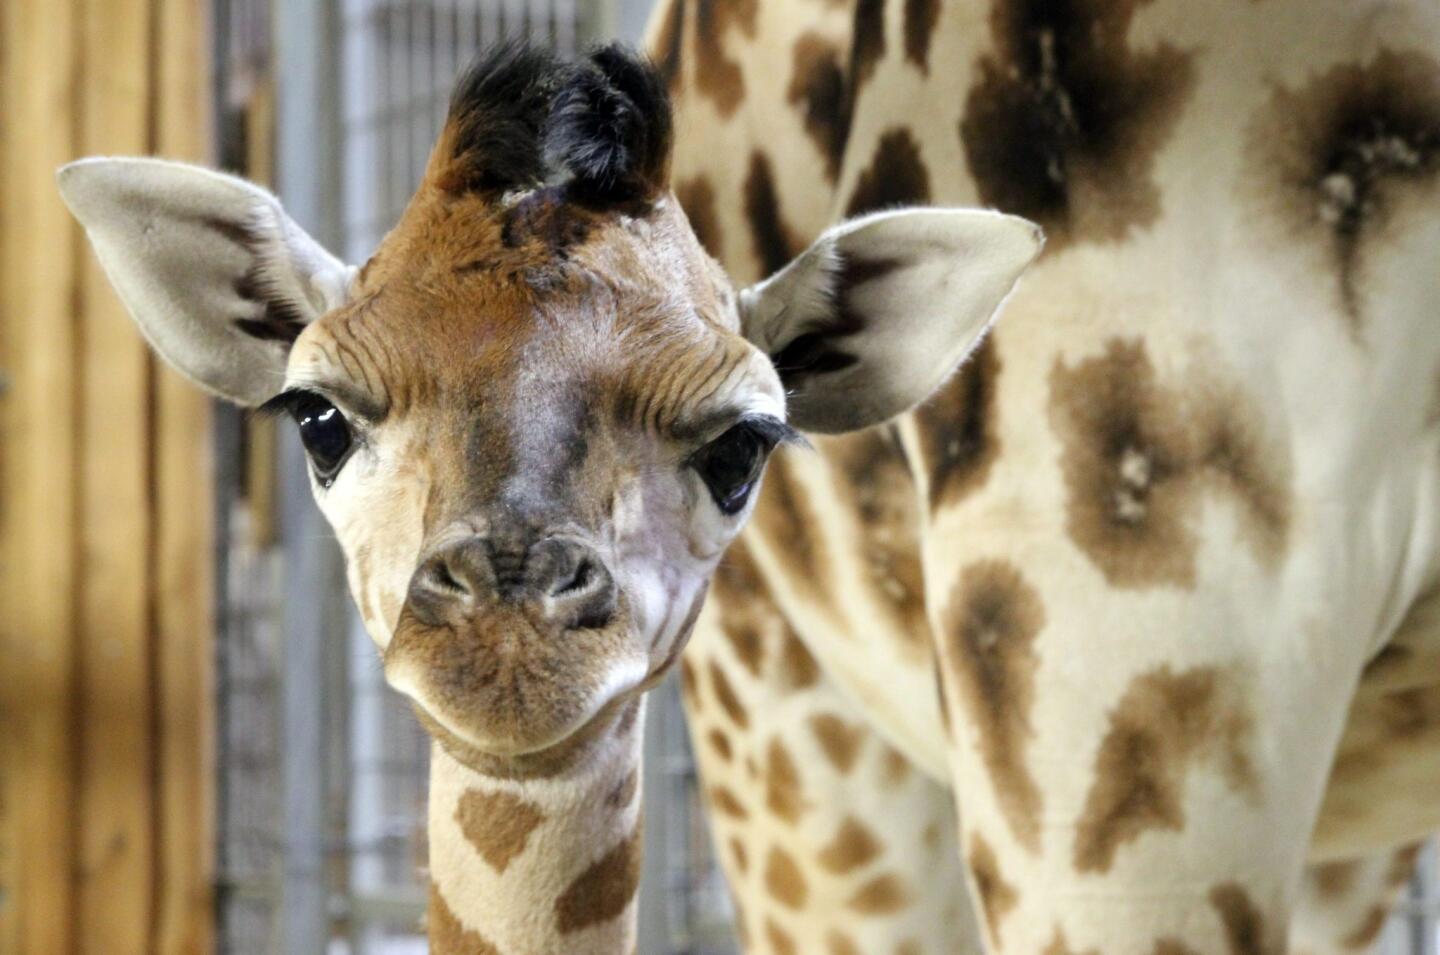 epa05675425 A female baby Rothschild giraffe (Giraffa camelopardalis camelopardis) in her enclosure in the Zoo in Opole, Poland, 14 December 2016. The baby giraffe, born on 08 December 2016, still does not have a name, which should start with the ninth letter of the alfabeth 'I' because she is the ninth giraffe born in Opole Zoo. The Rothschild giraffes is one of the most endangered distinct populations of giraffes. EPA/KRZYSZTOF SWIDERSKI POLAND OUT ** Usable by LA, CT and MoD ONLY **